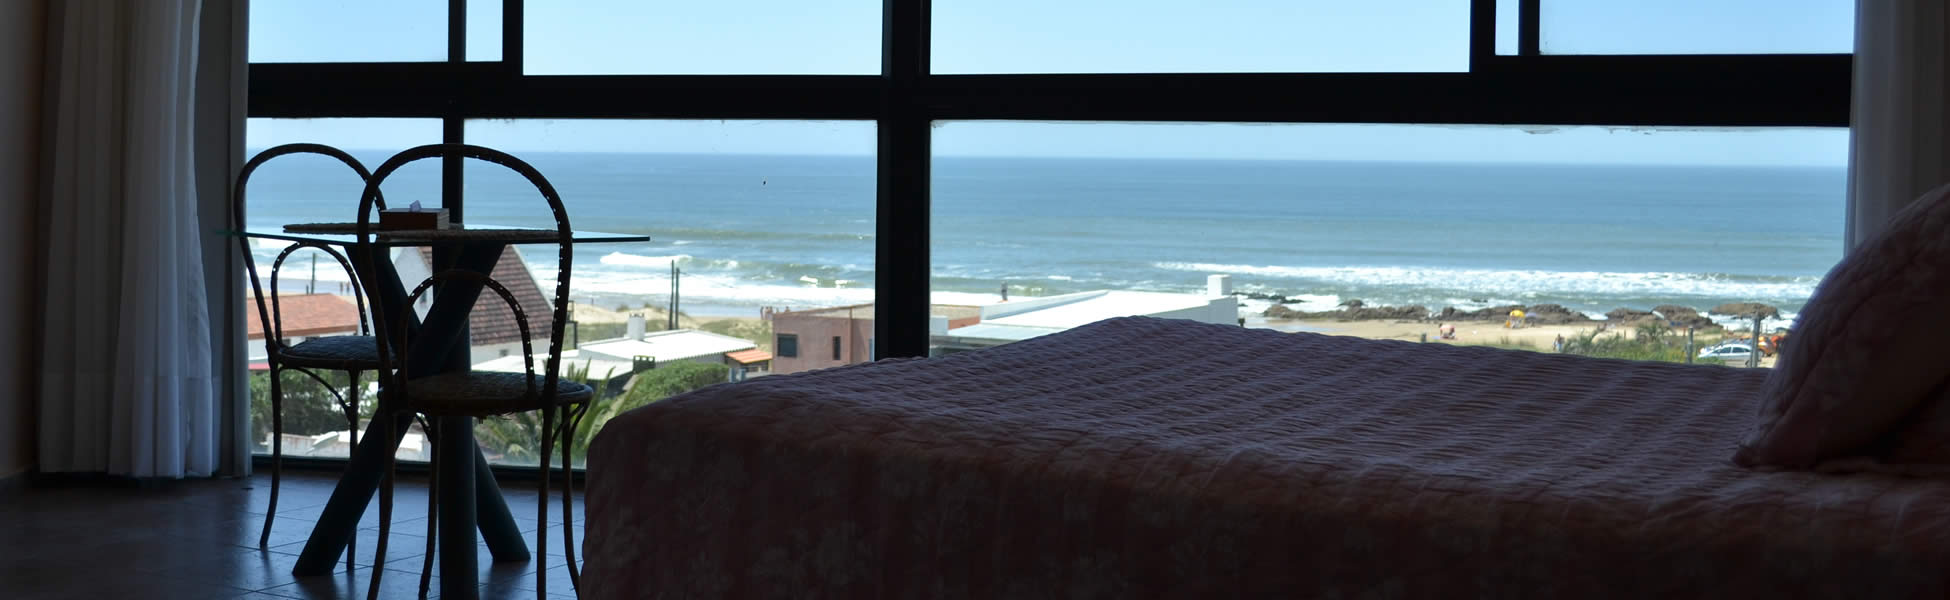 Apartment with ocean view